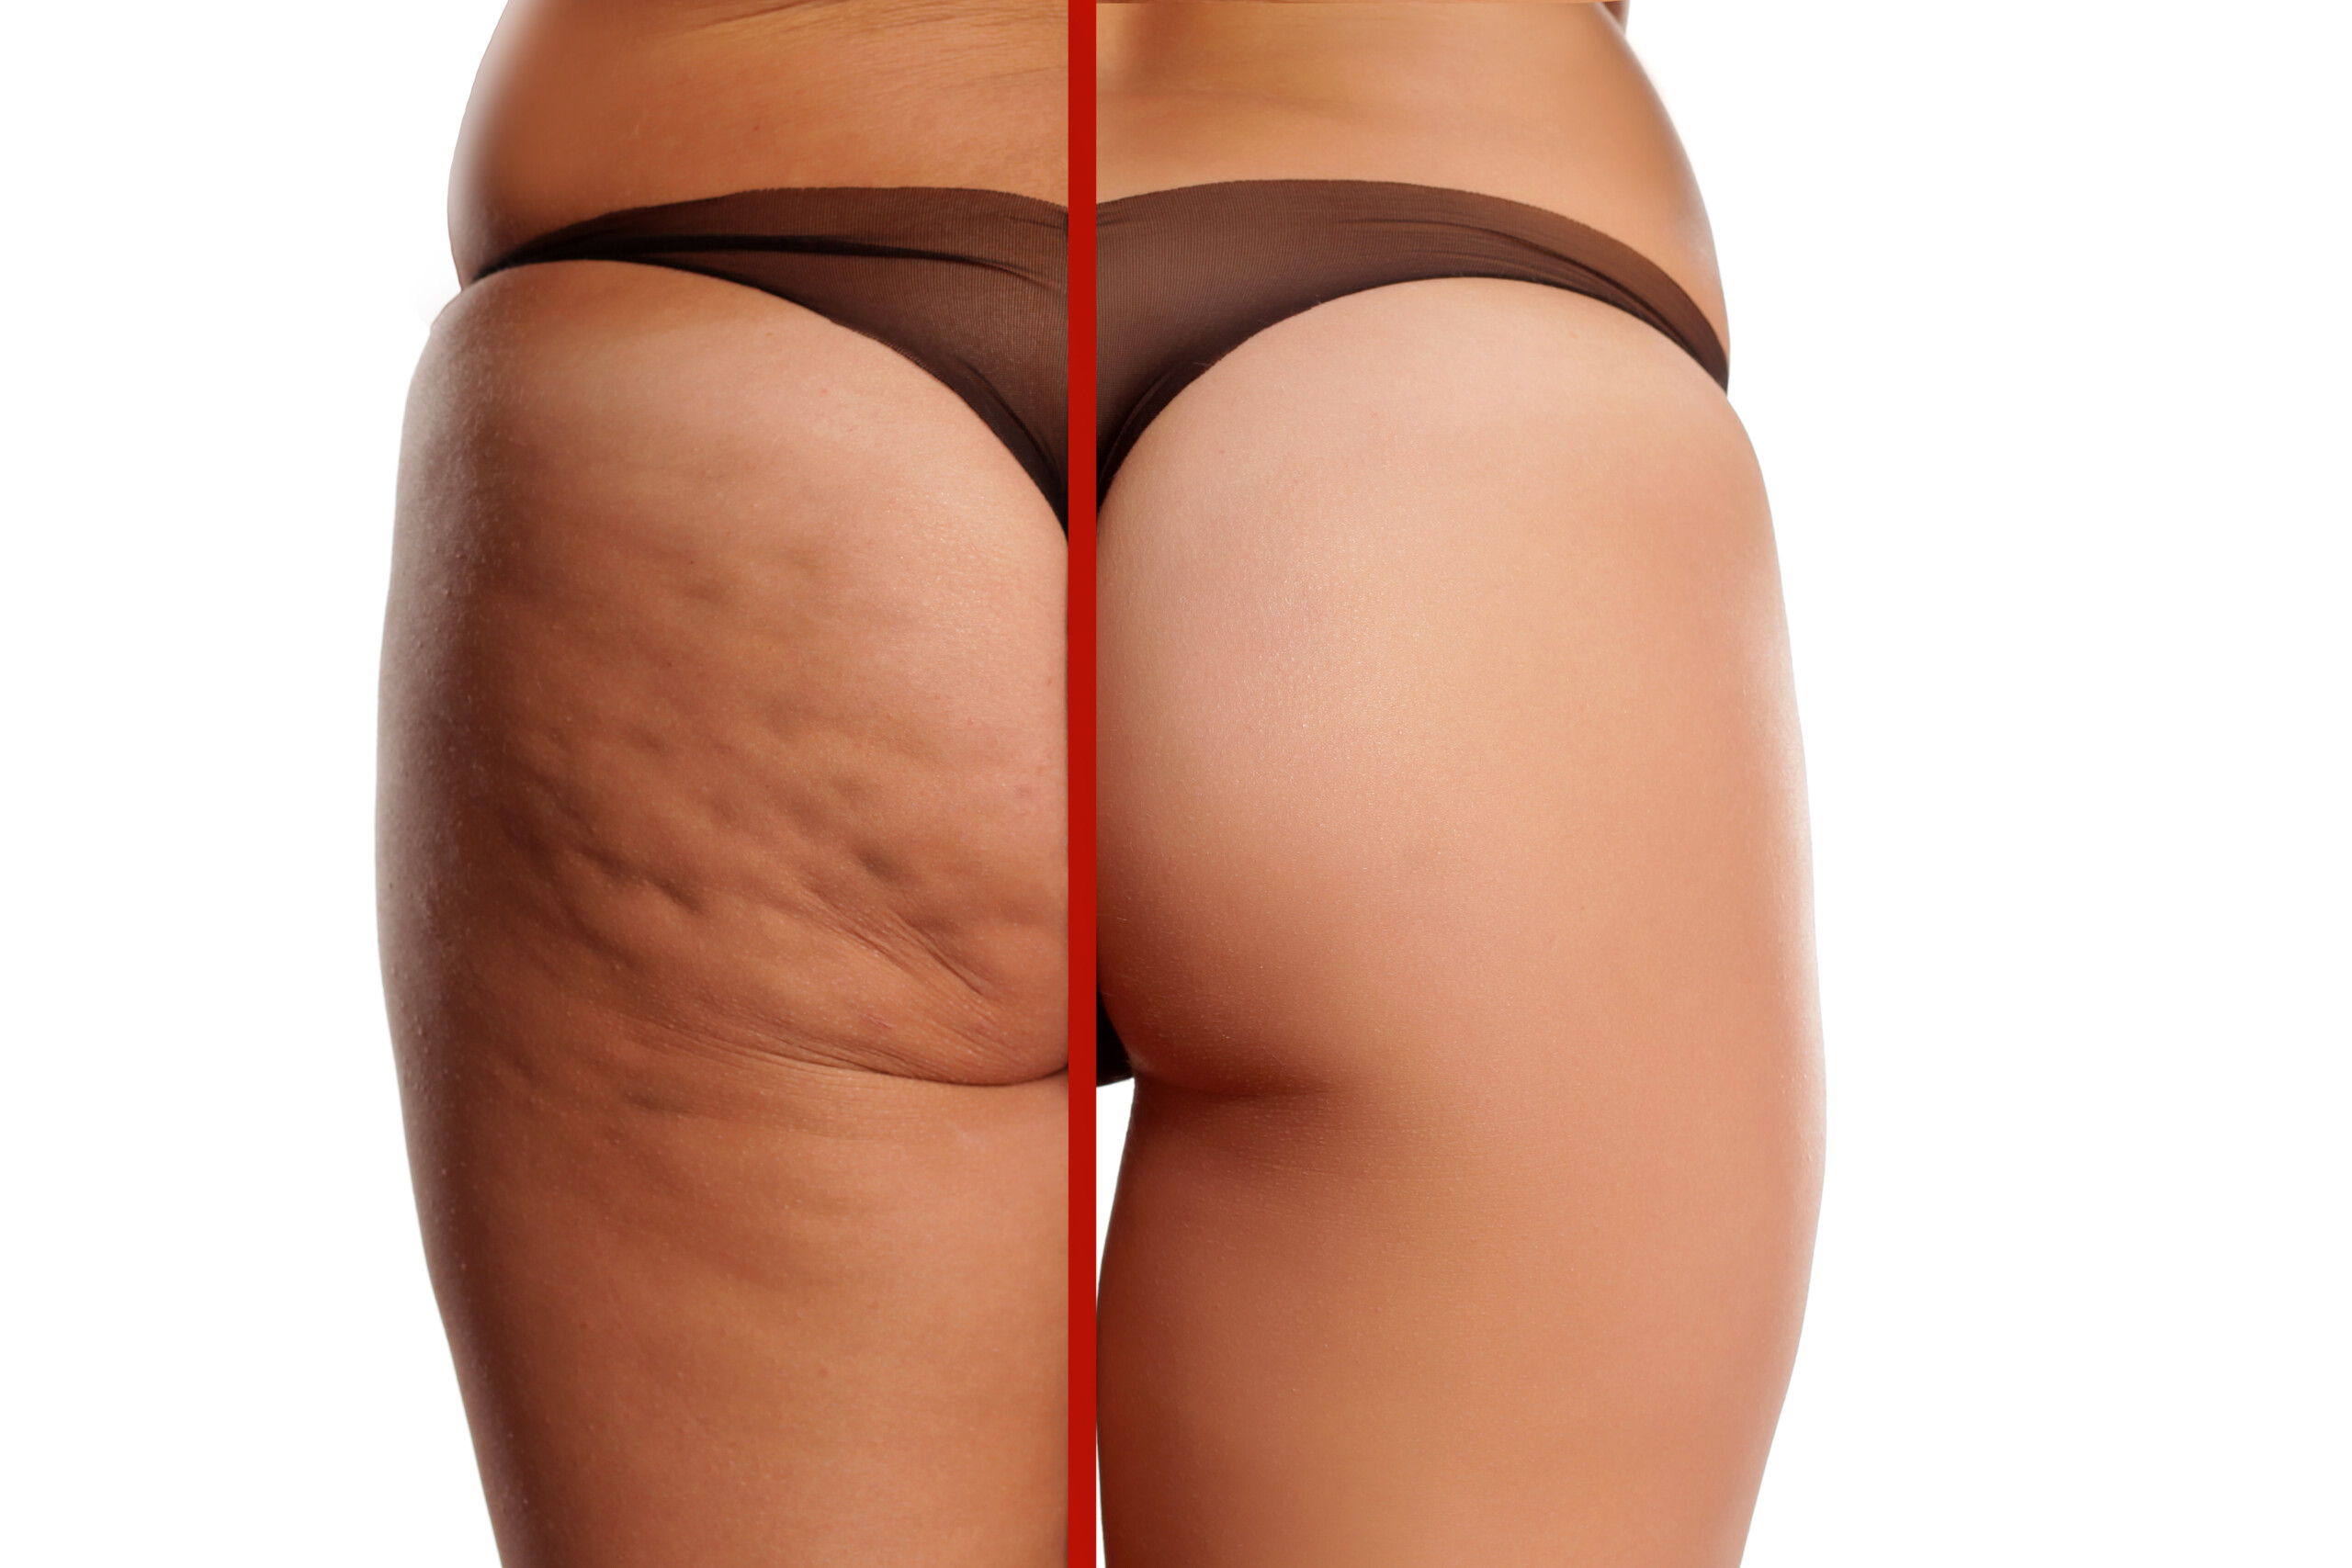 Before and after of a woman's buttocks after cellulite treatment with Aveli.